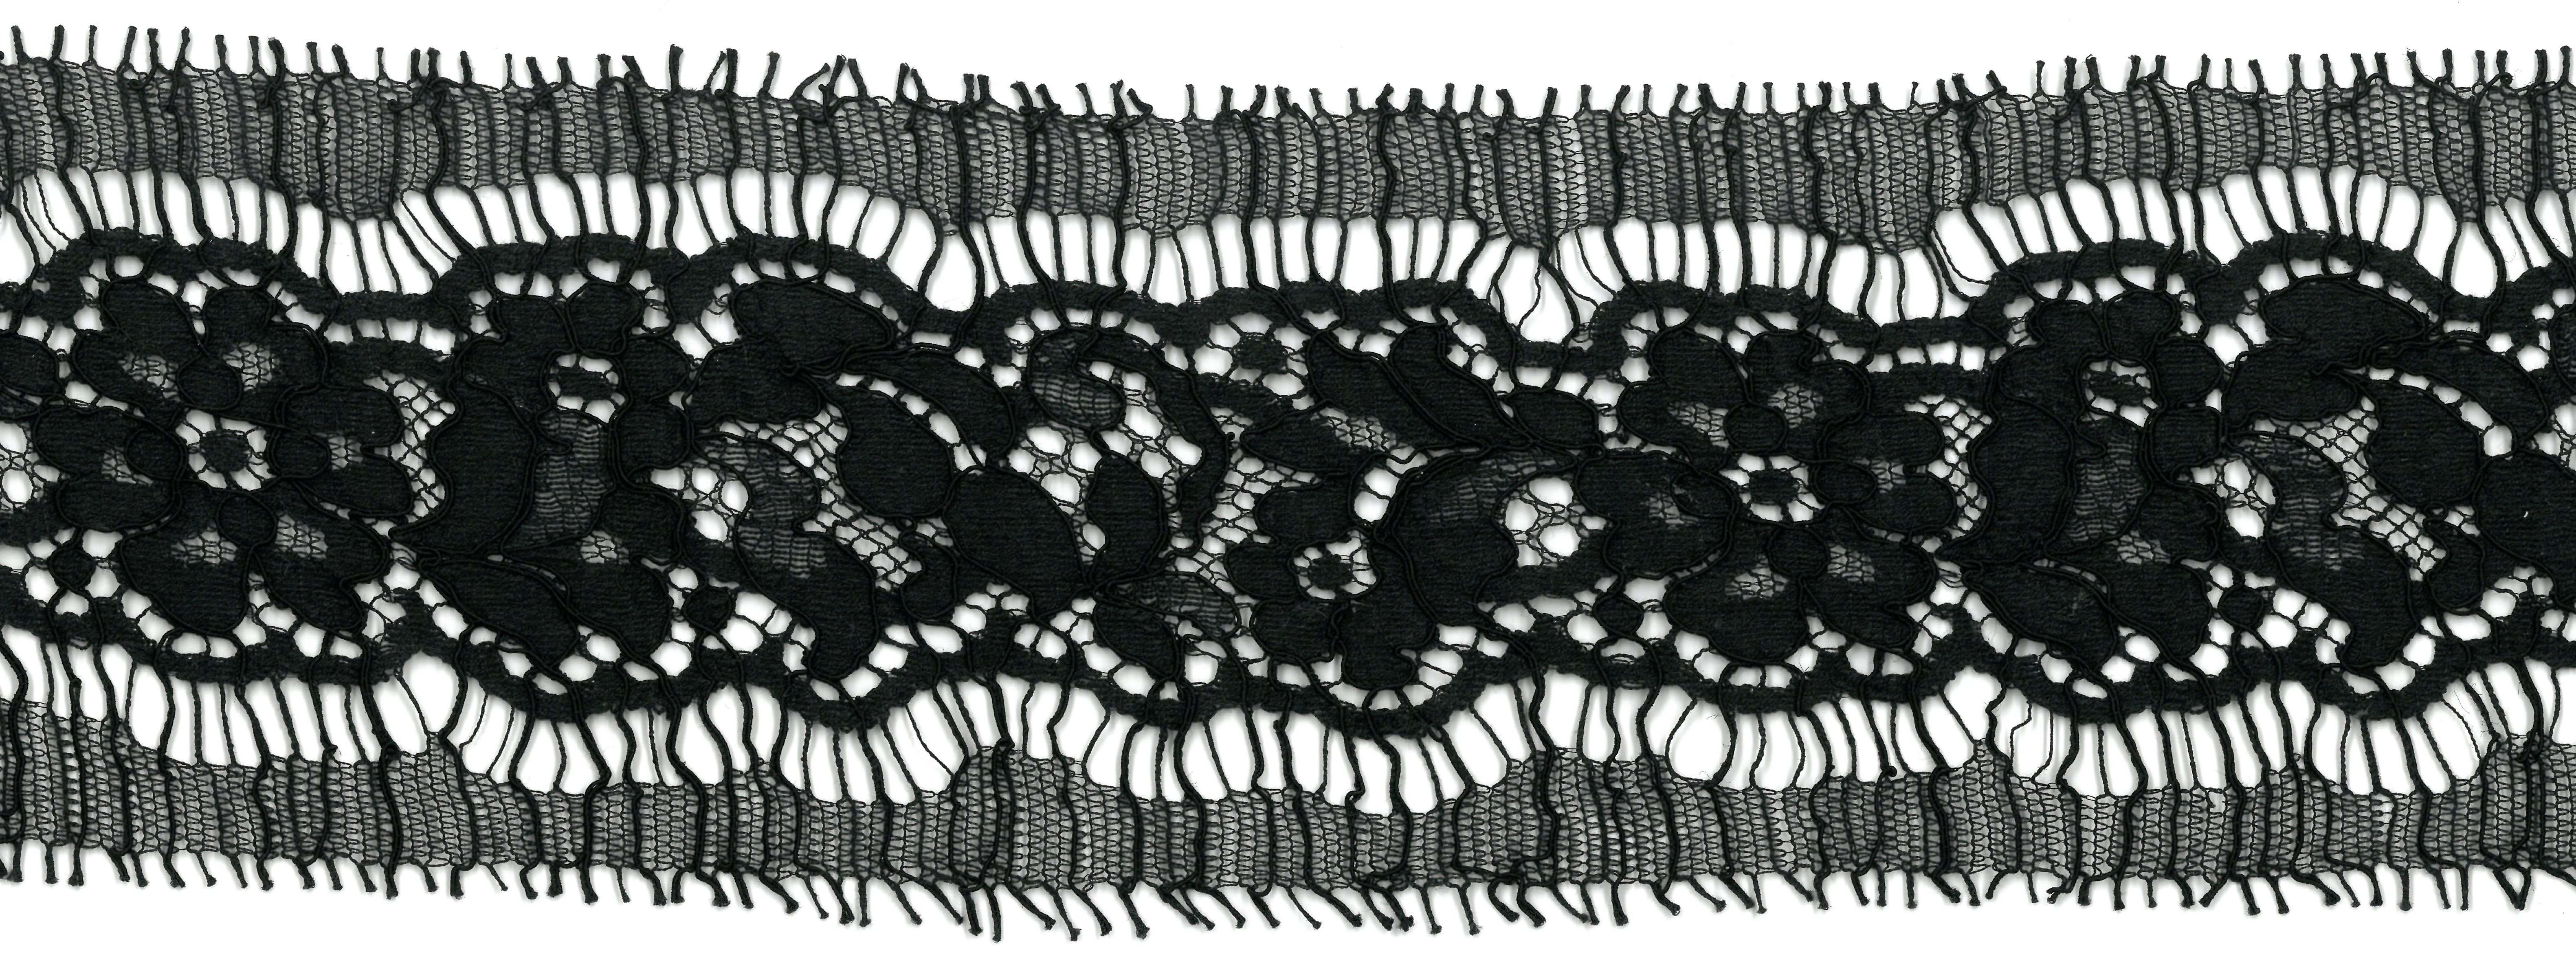 FRENCH LACE EDGING